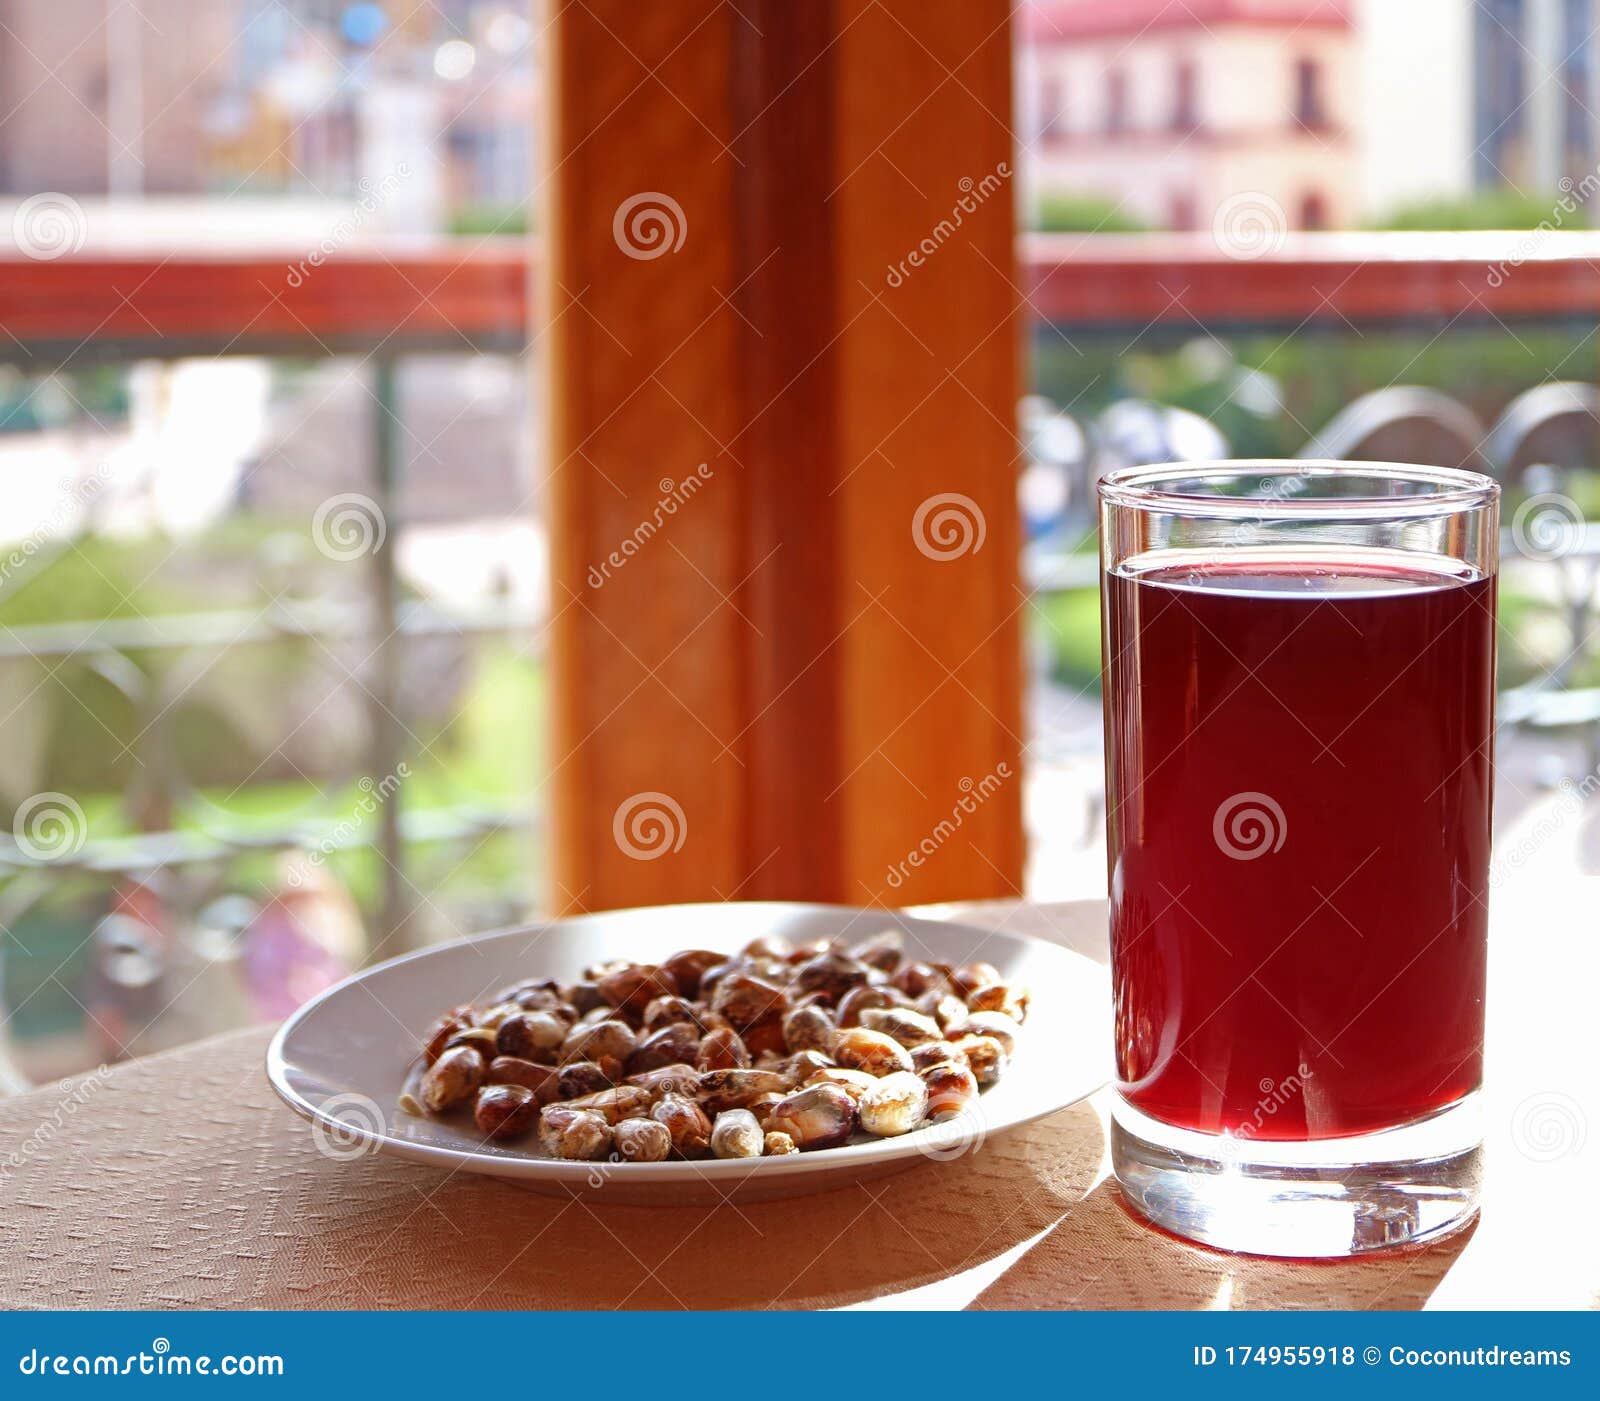 chicha morada, the andean traditional beverage made from corn served with toasted corn kernels cancha